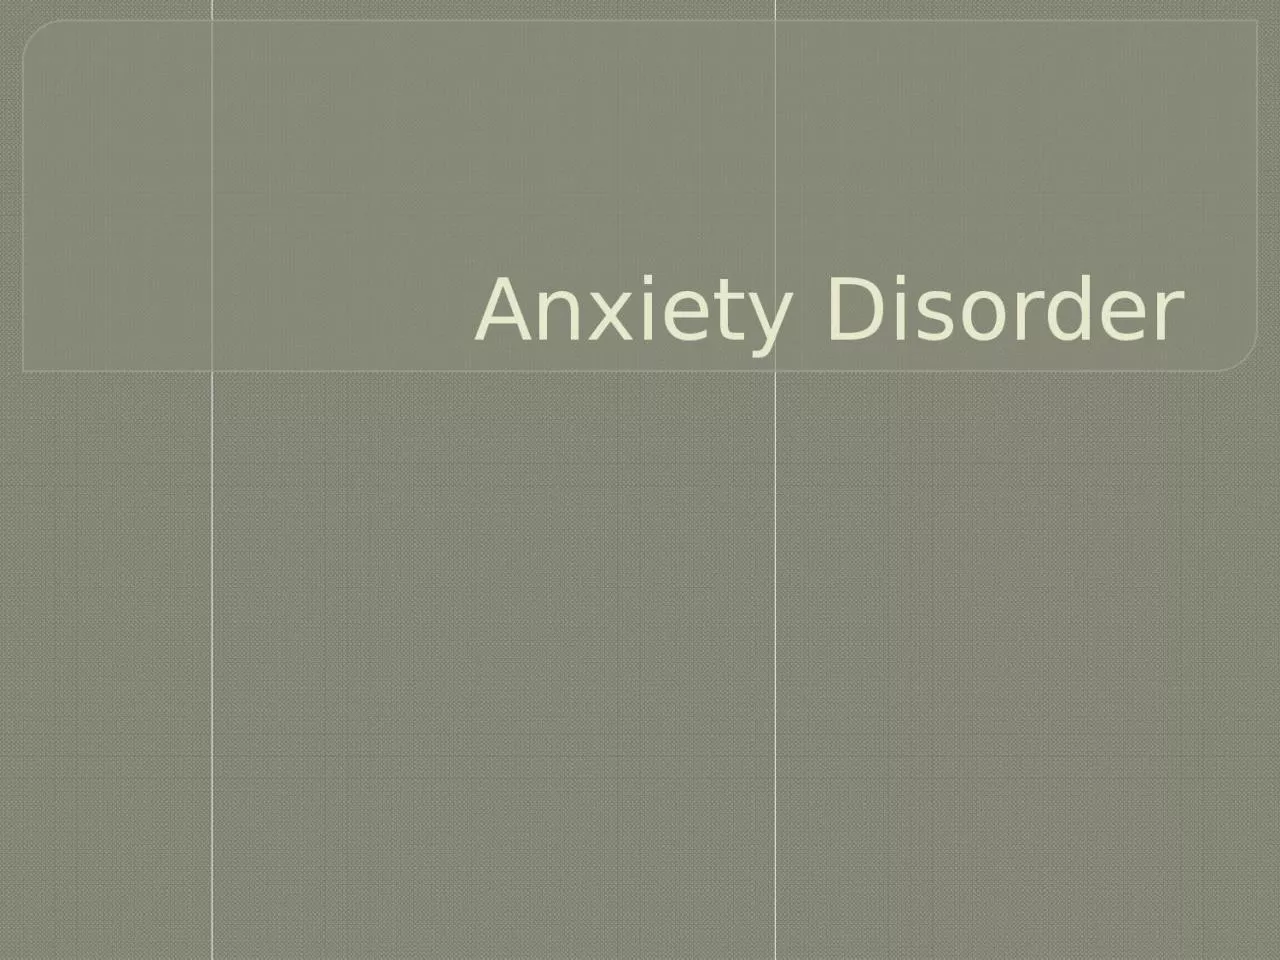 Anxiety Disorder Definition and Symptoms